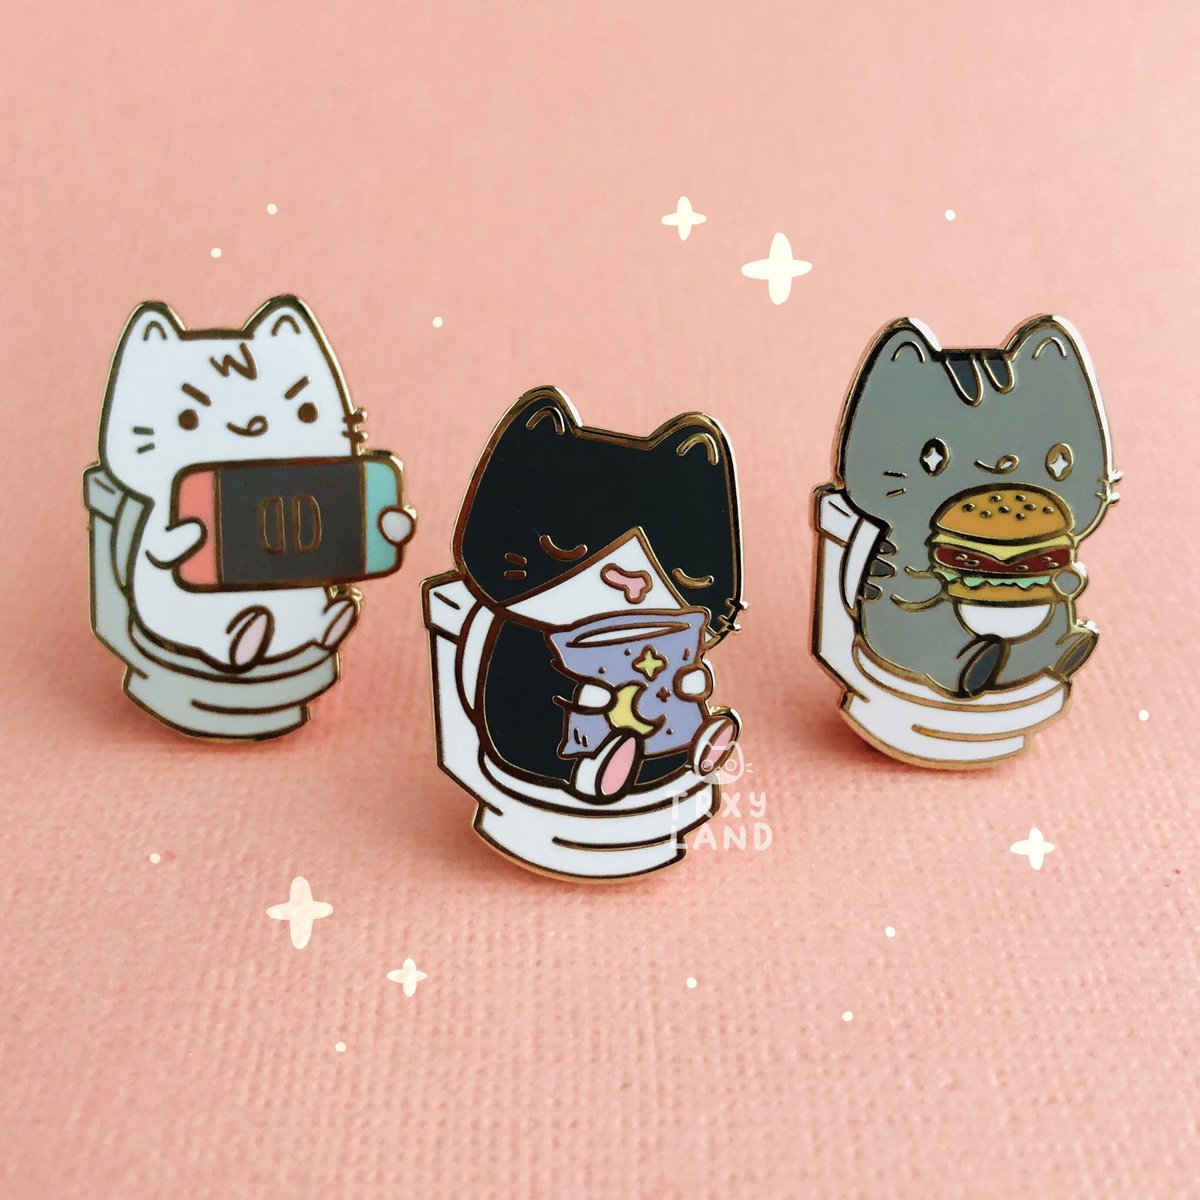 New pins & foil washi coming to my shop on May 23 Sat at 11AM EST!✨ https://t.co/H5lVzOEUkm 